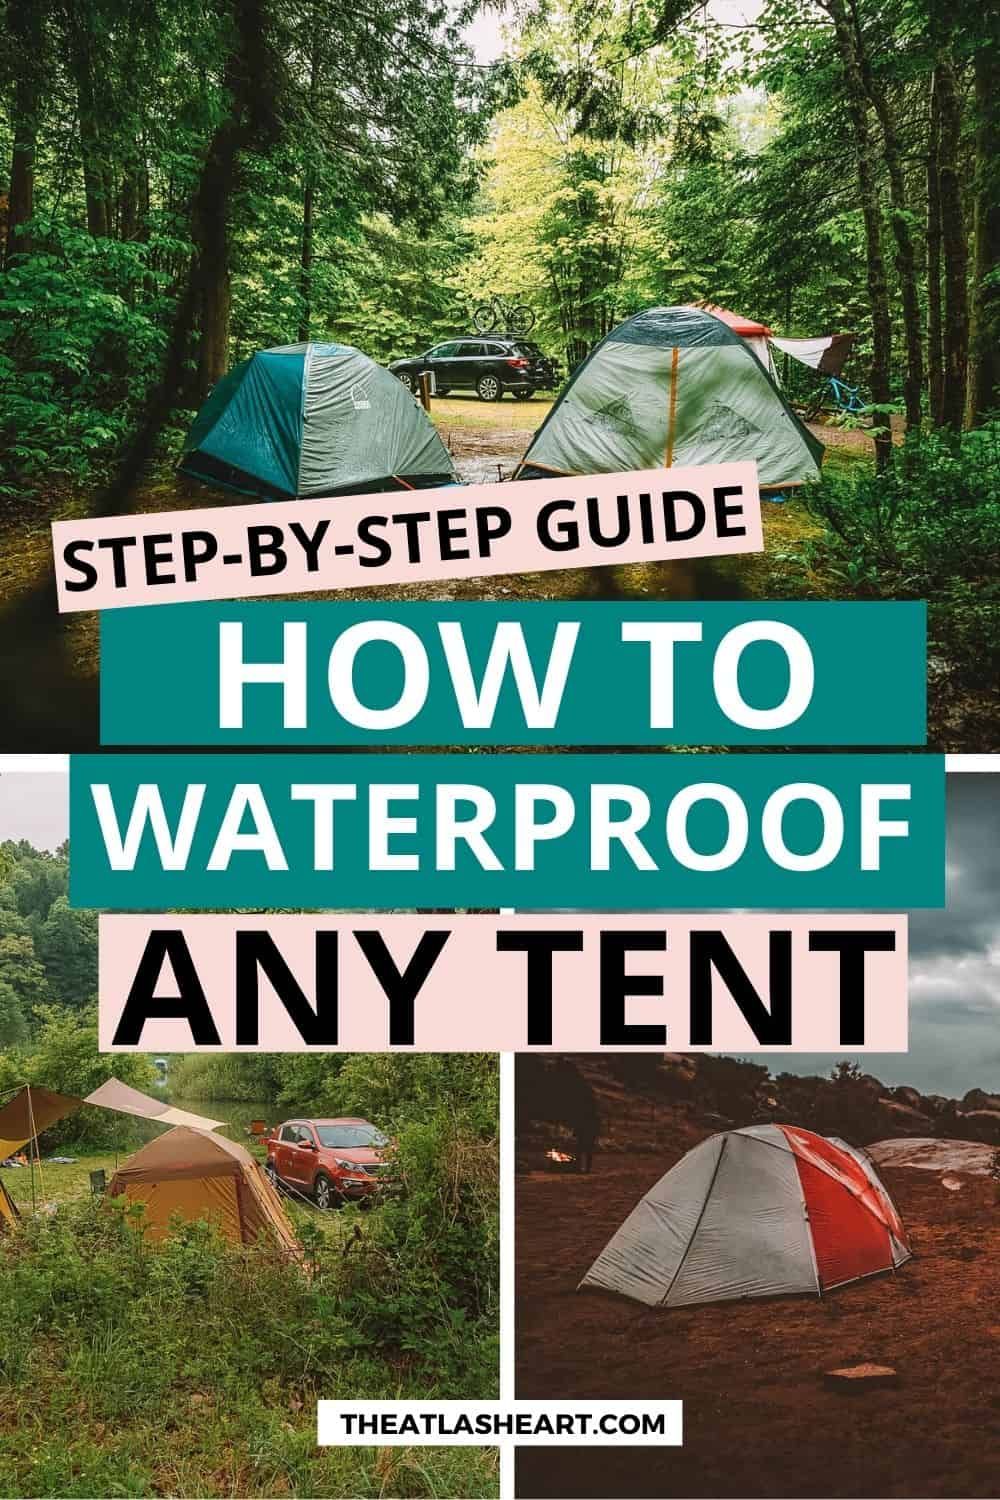 How to Waterproof a Tent: Step-By-Step Guide to Waterproofing